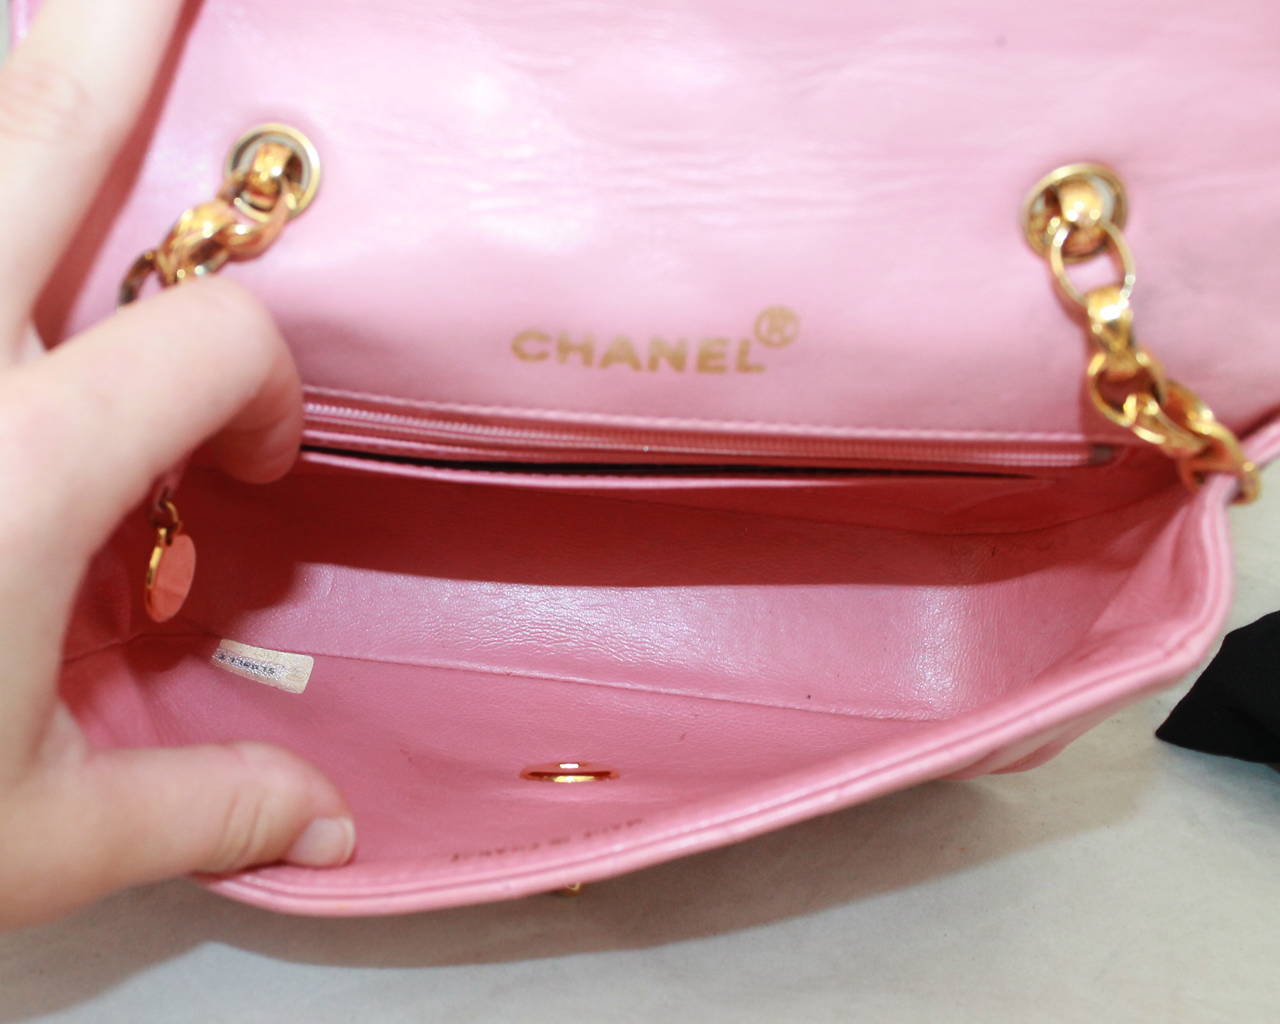 Chanel 1990's Pink Quilted Lambskin Handbag GHW - circa 1991. This bag is in fair vintage condition with wear consistent with being 24 years old. It has a quilted gold chain unique to the 1990's Chanel handbags. The bag has wear on the leather on